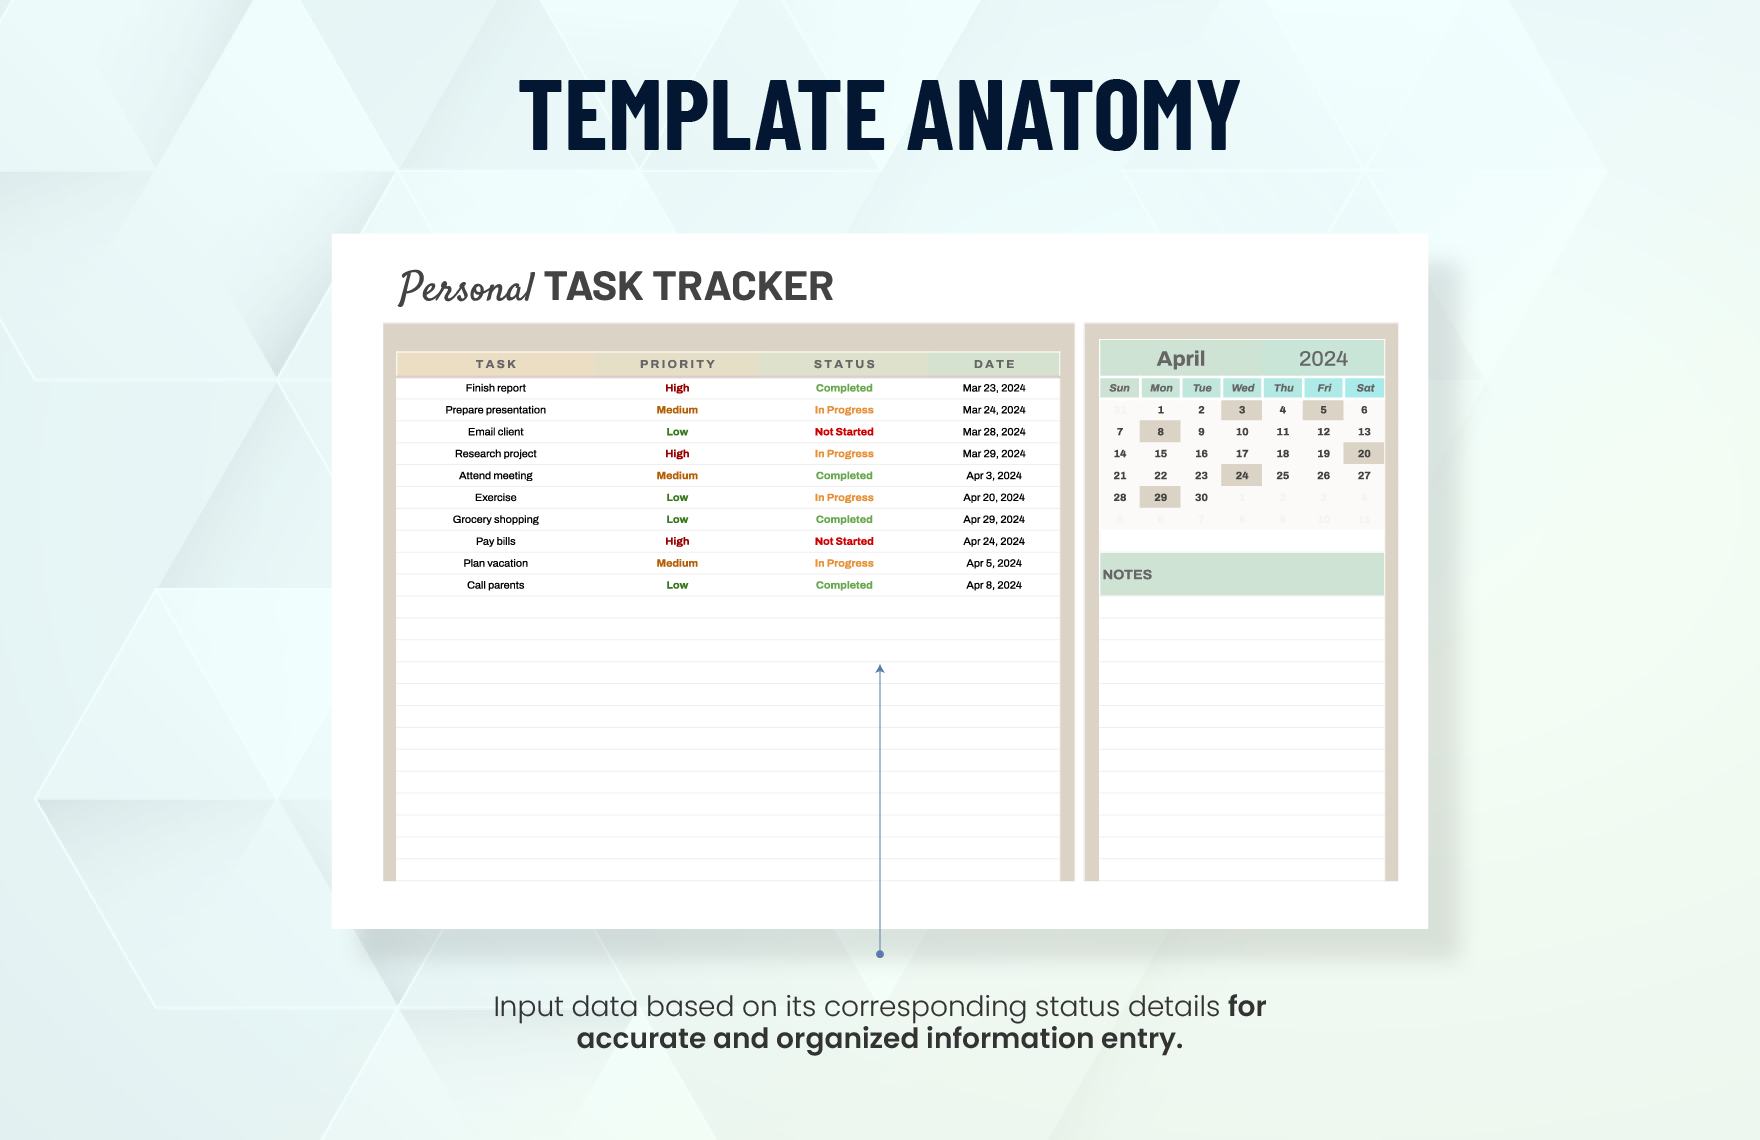 Personal Task Tracker Template